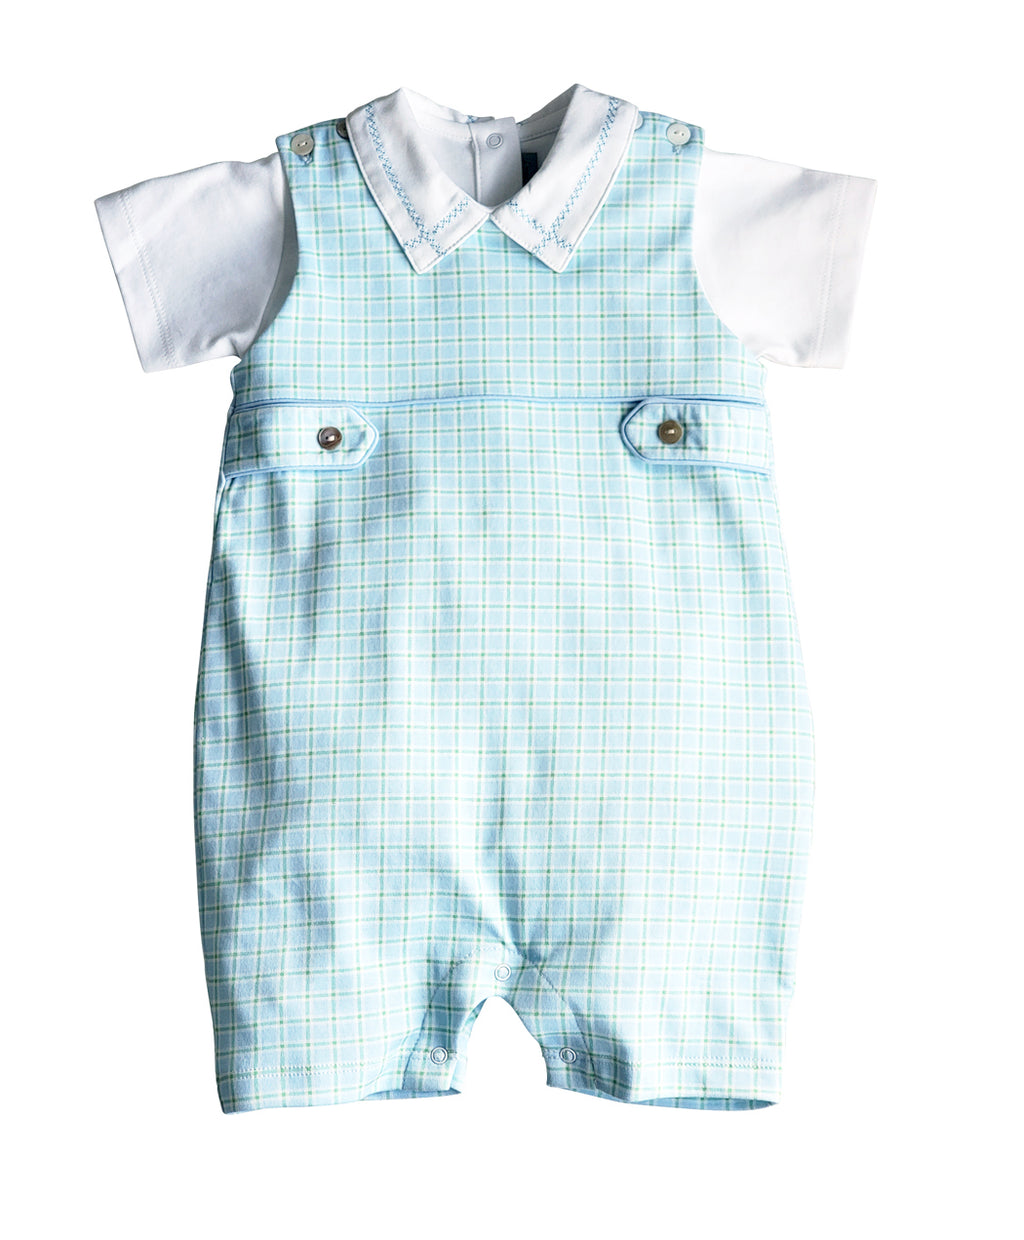 Bows and Flowers Boy's Overall Set Pima Cotton - Little Threads Inc. Children's Clothing